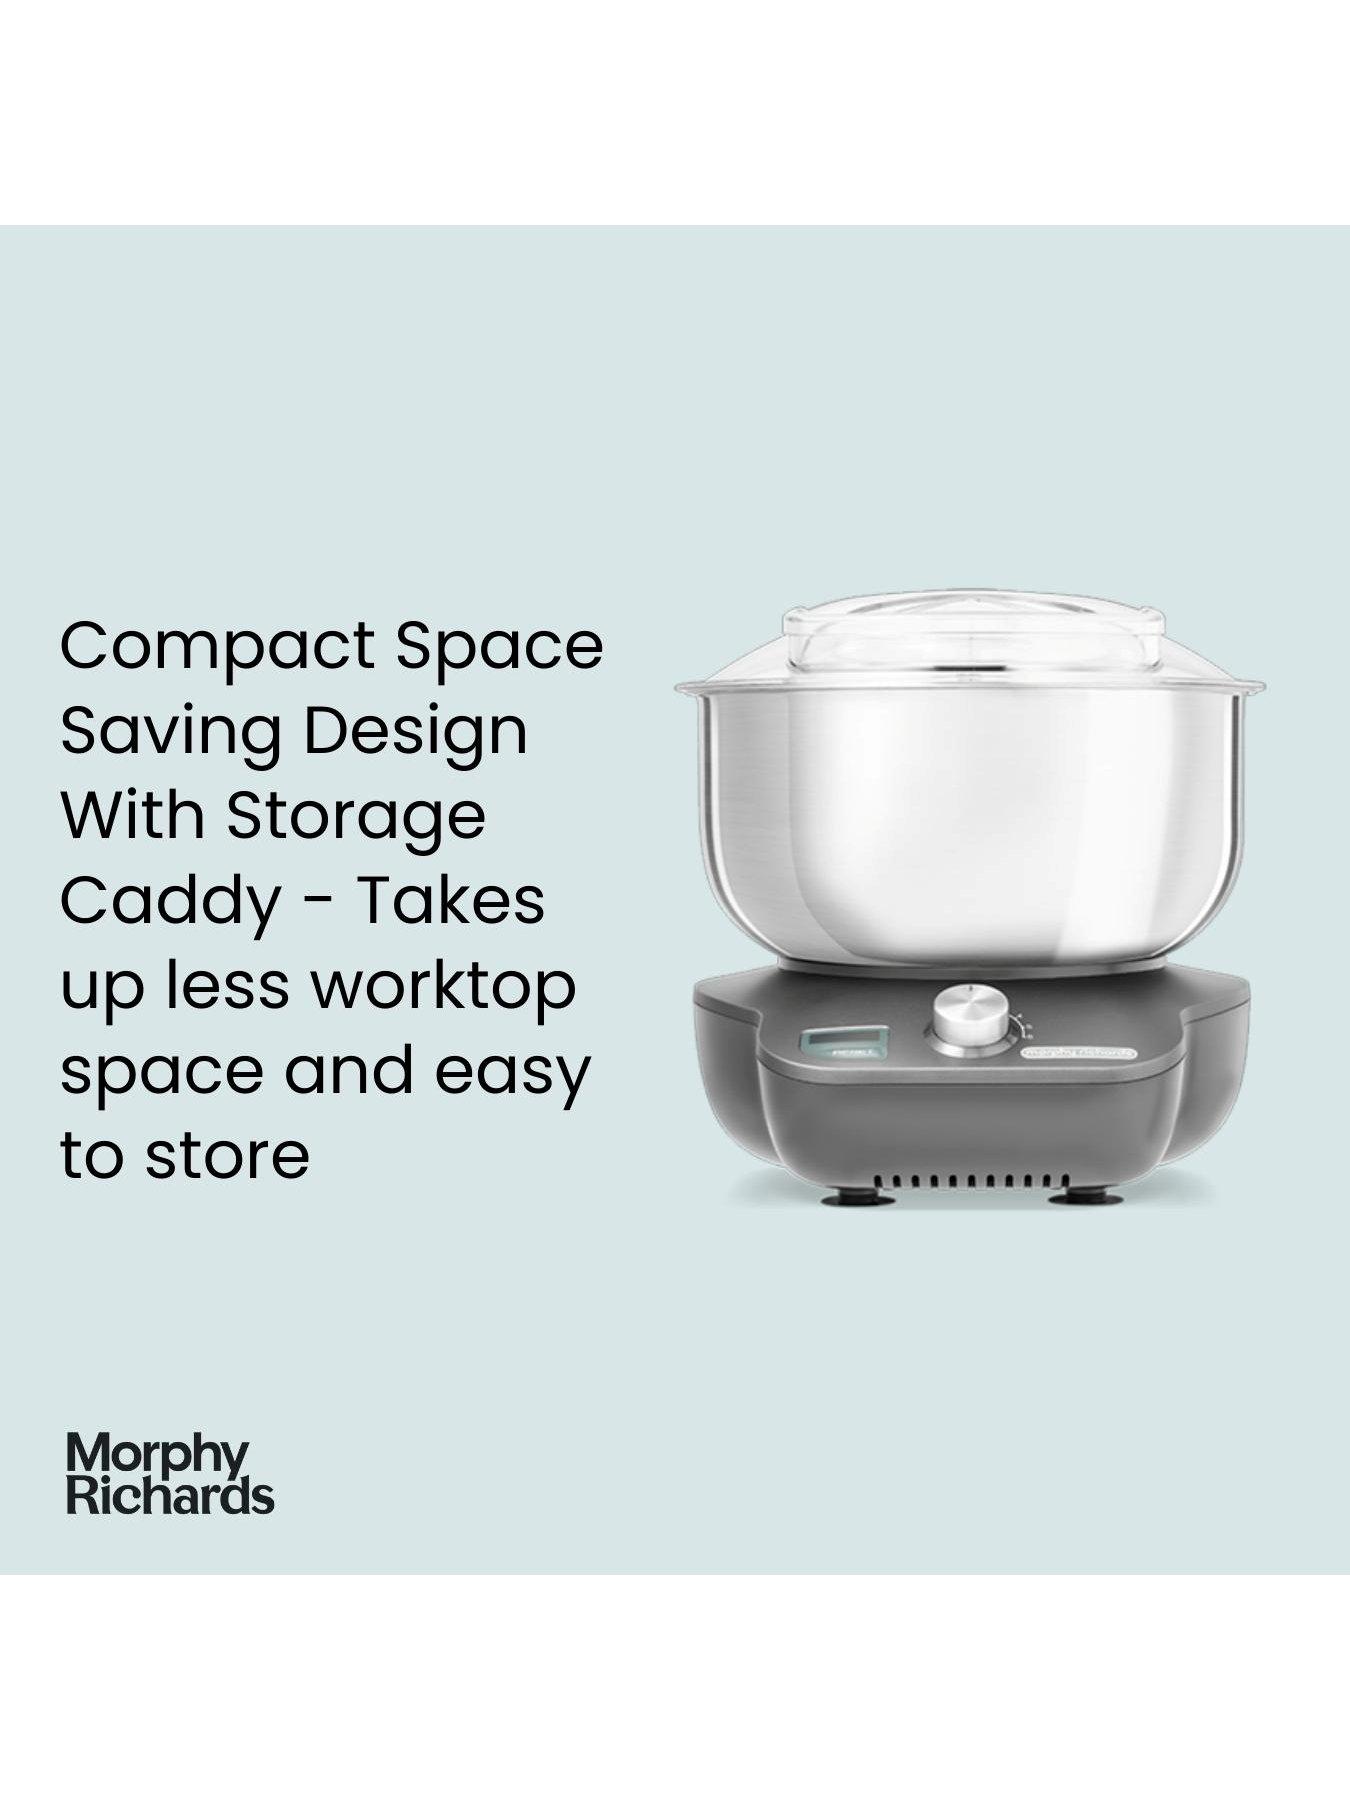 Morphy Richards MixStar review – perfect stand mixer for small kitchens